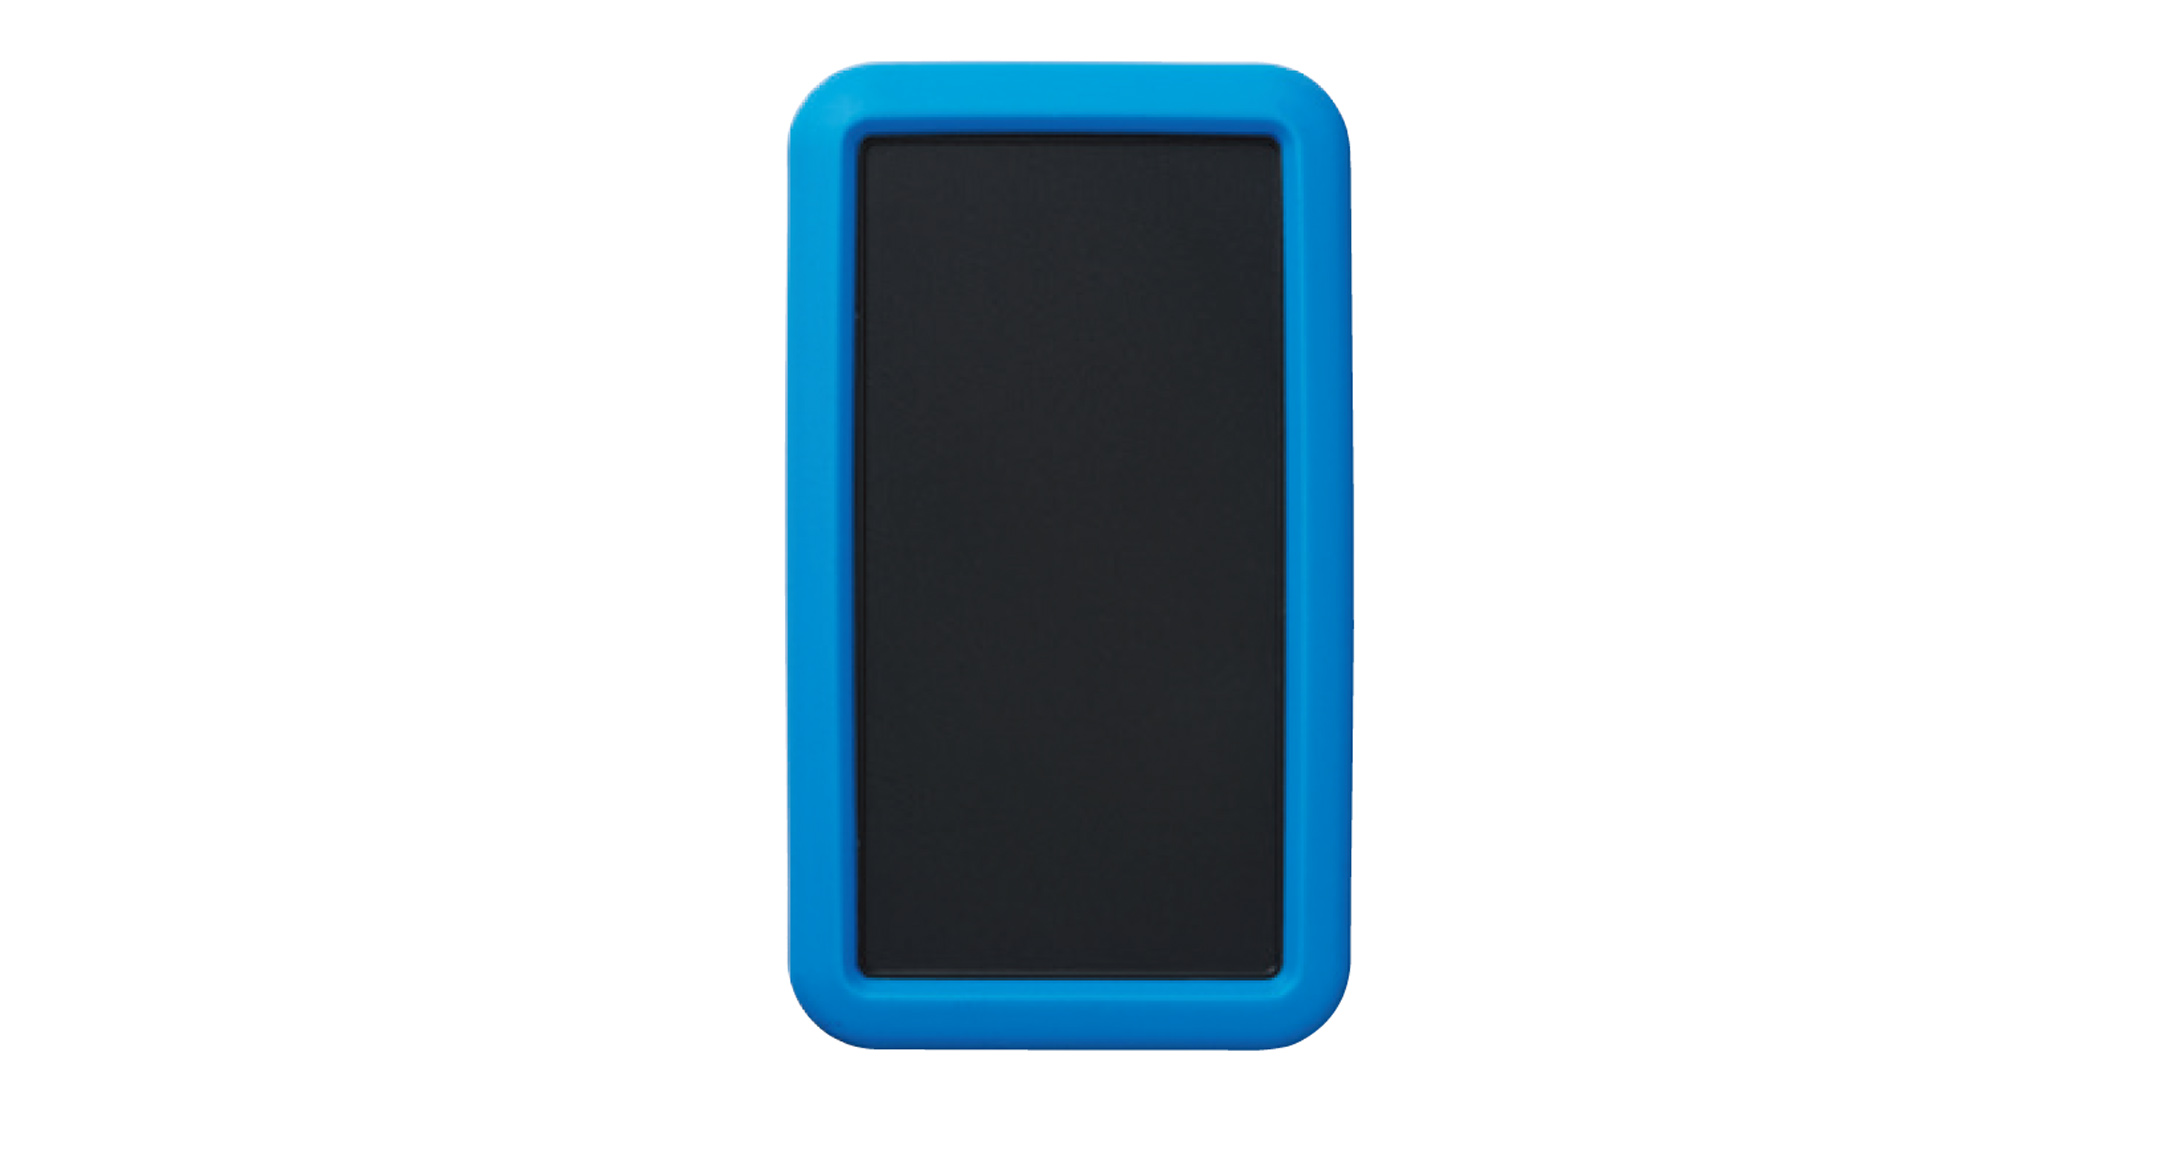 HANDHELD CASE with SILICONE COVER - LCS series:Dark gray/Blue